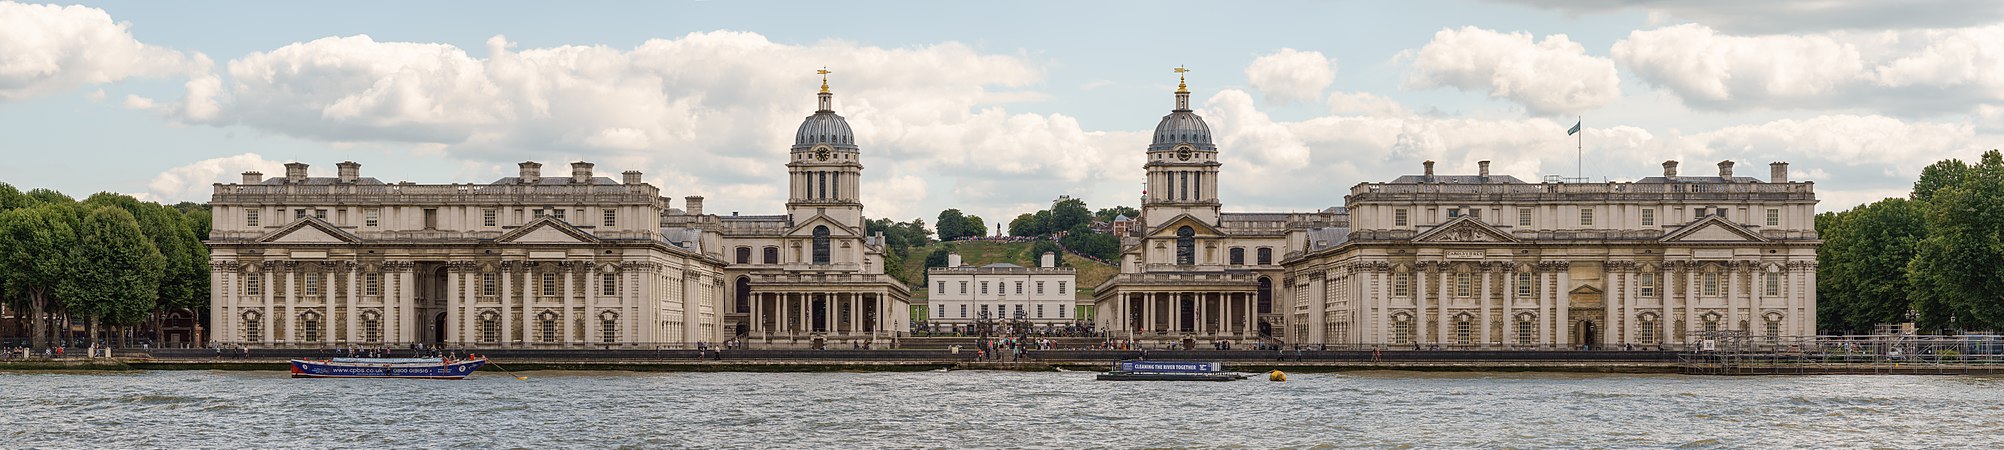 Old Royal Naval College, by Colin